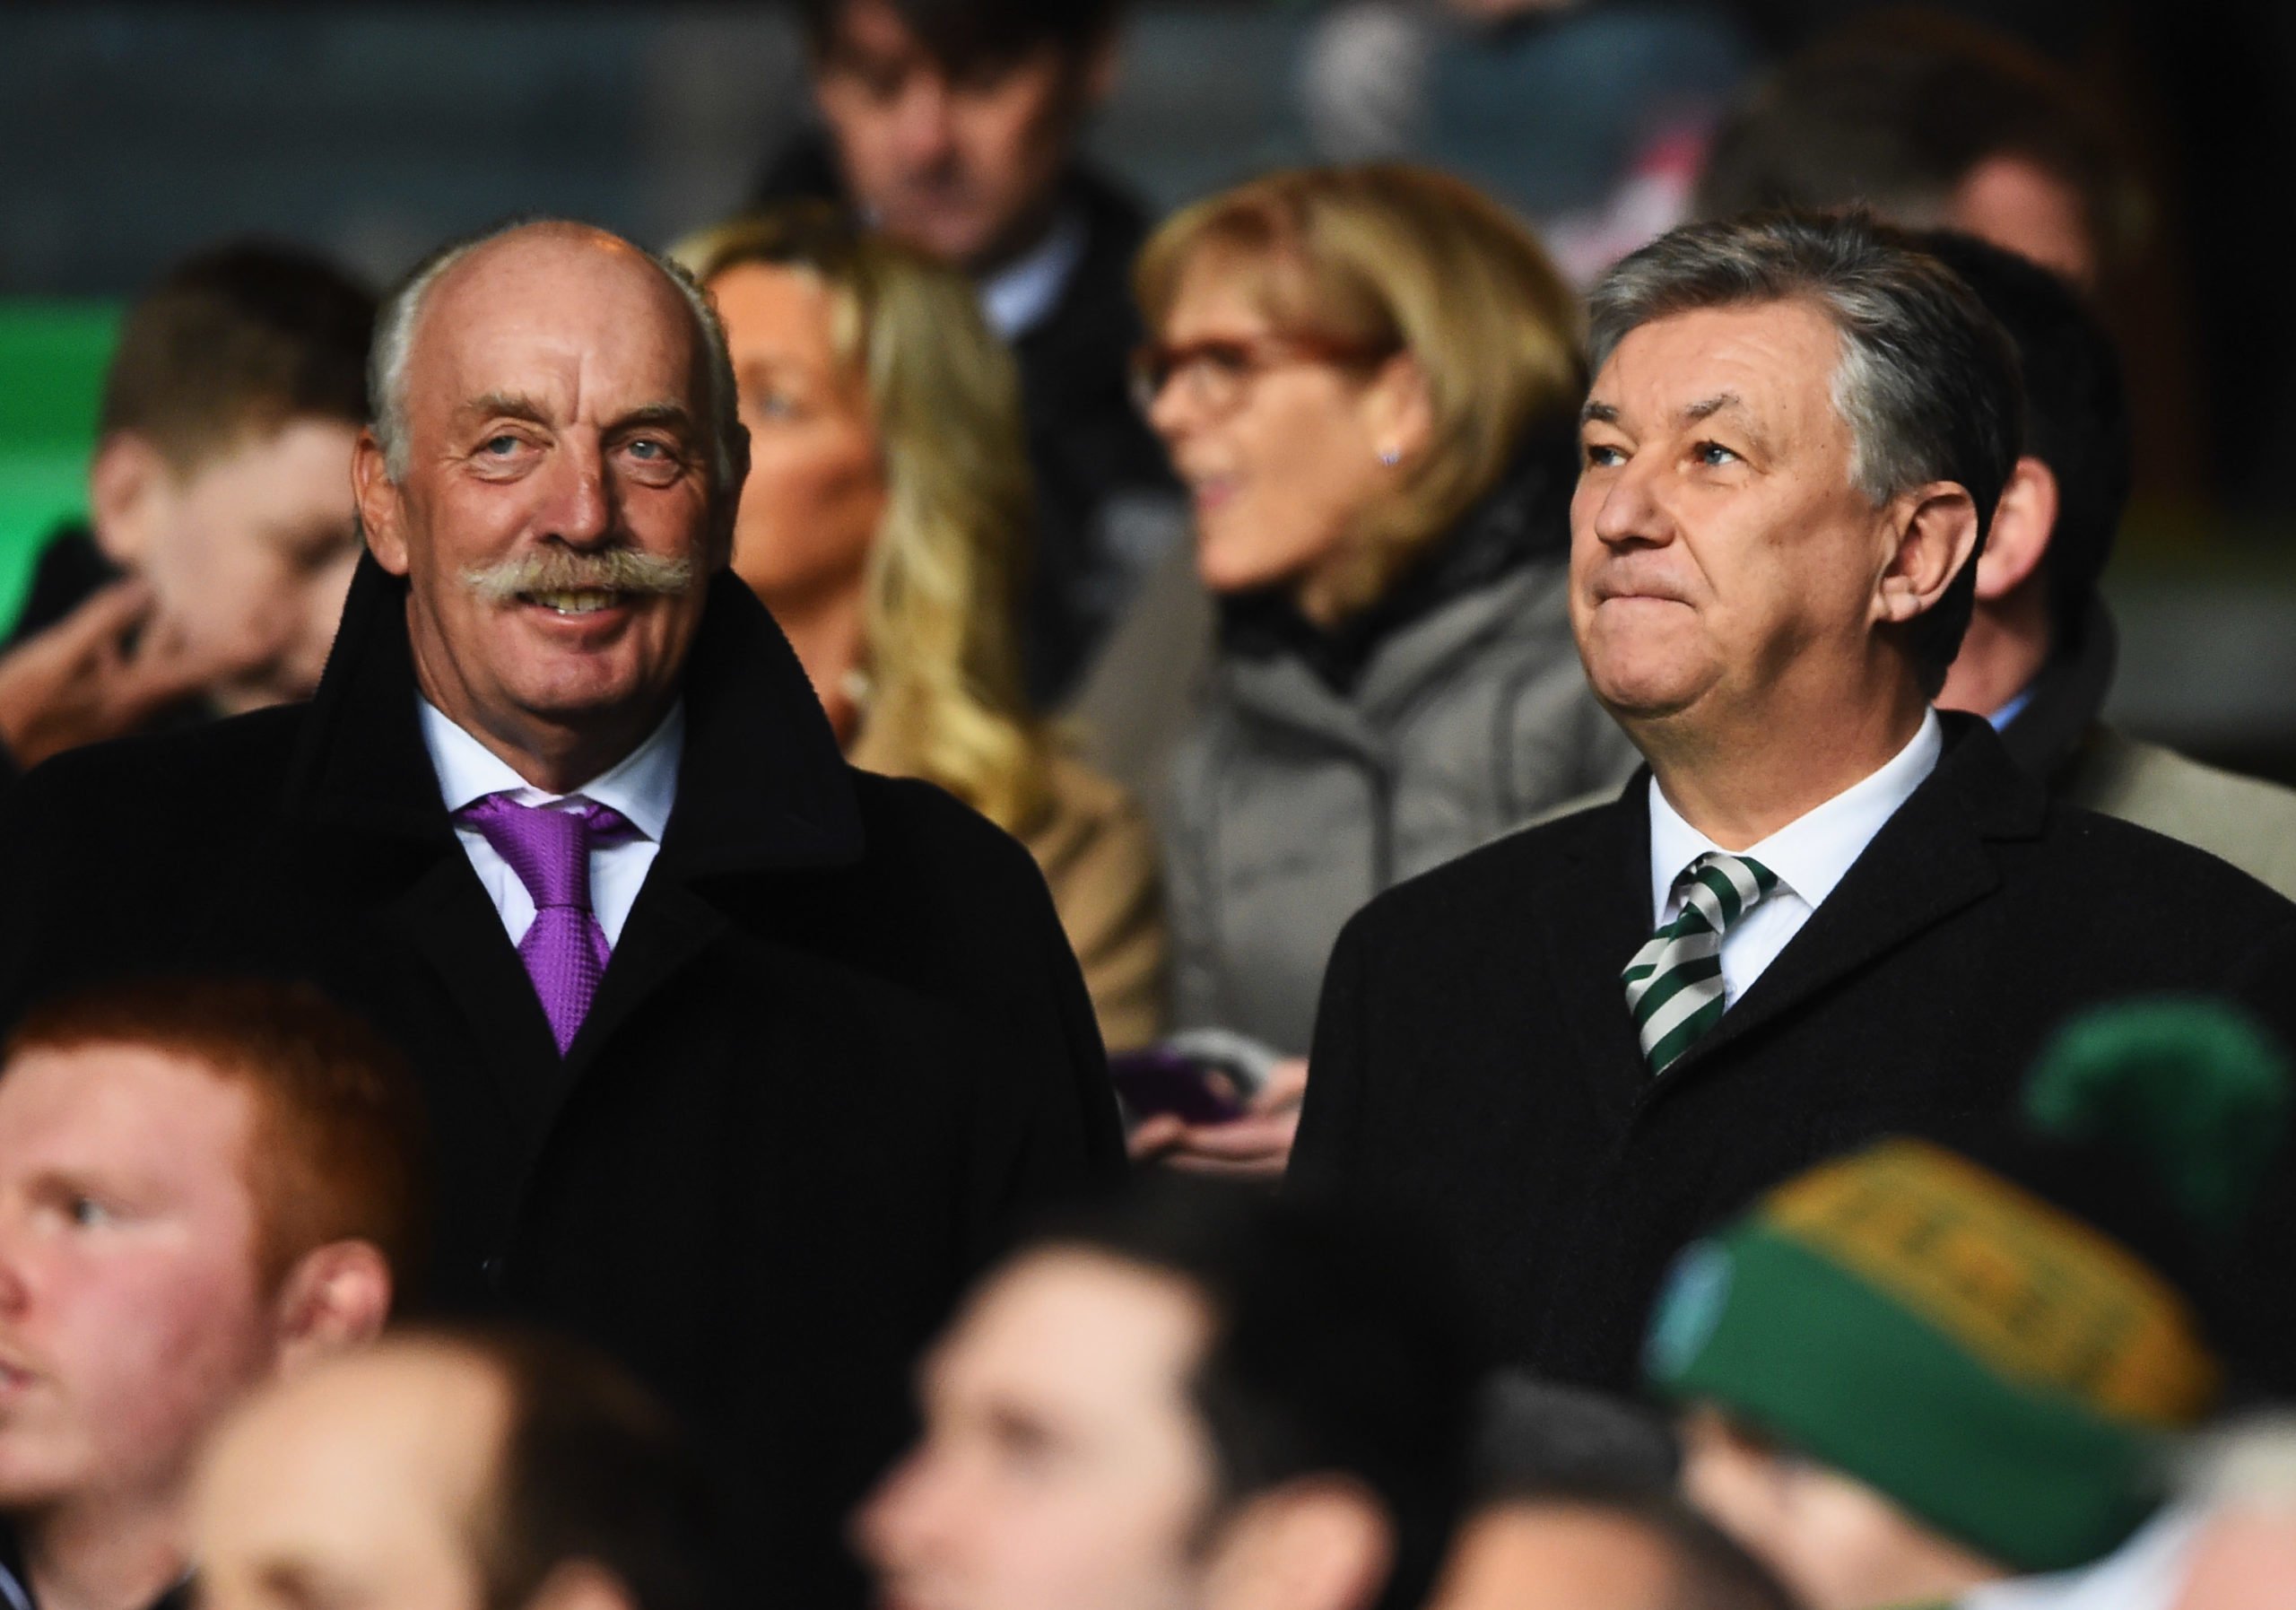 Dermot Desmond has stirred up ill Celtic feelings that were best left in the past